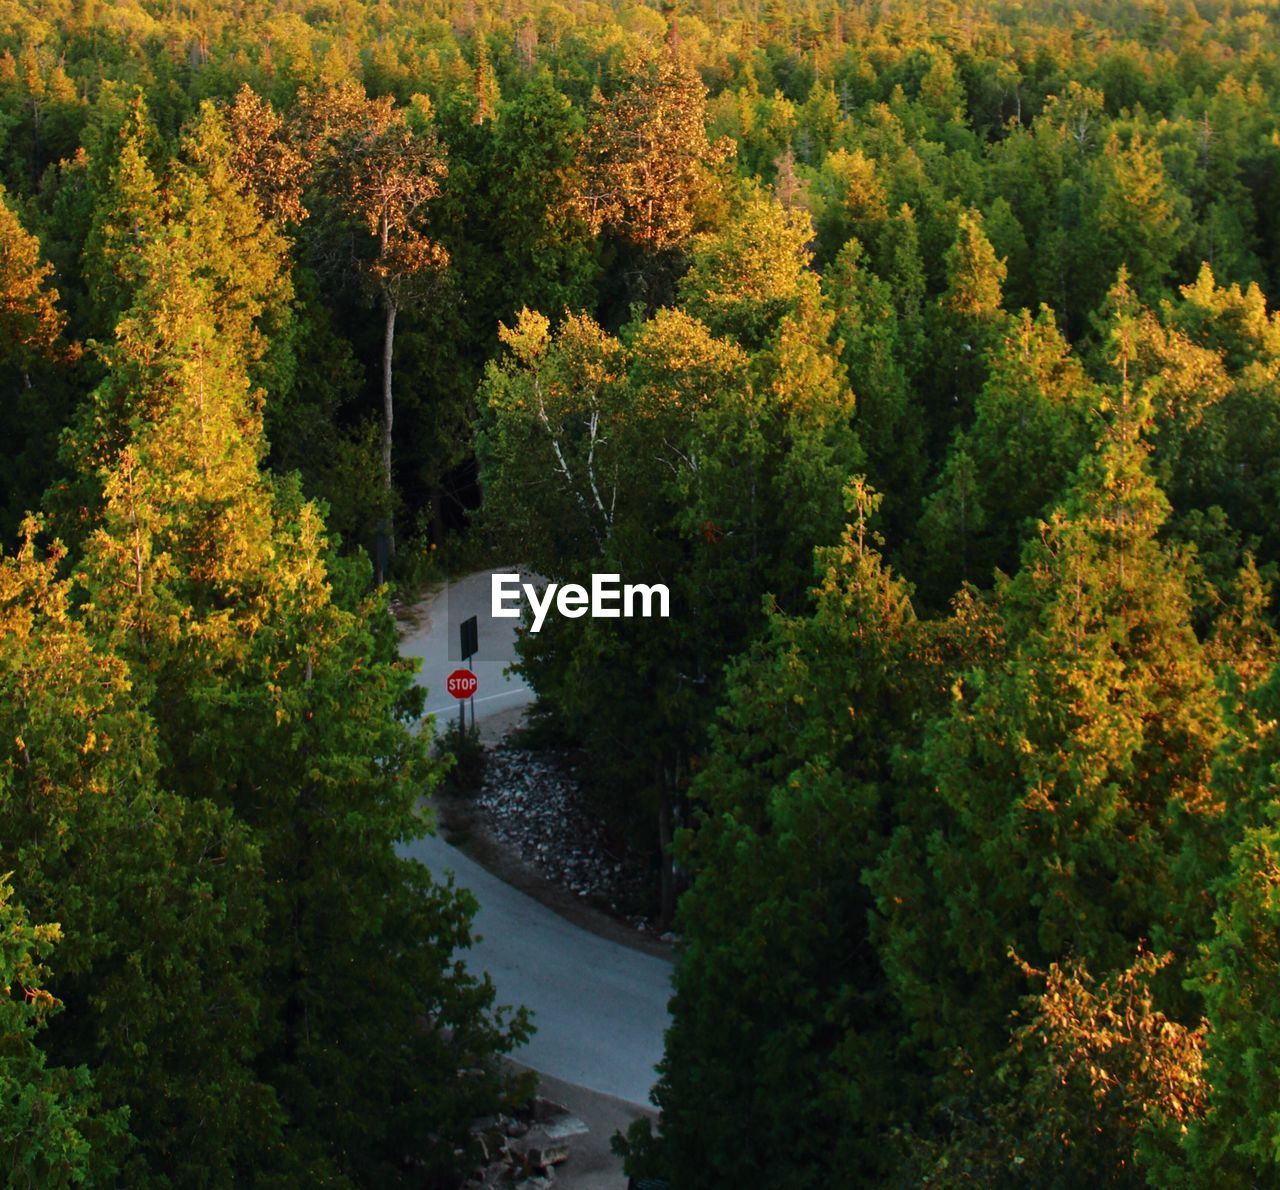 High angle view of trees in forest and a road during autumn